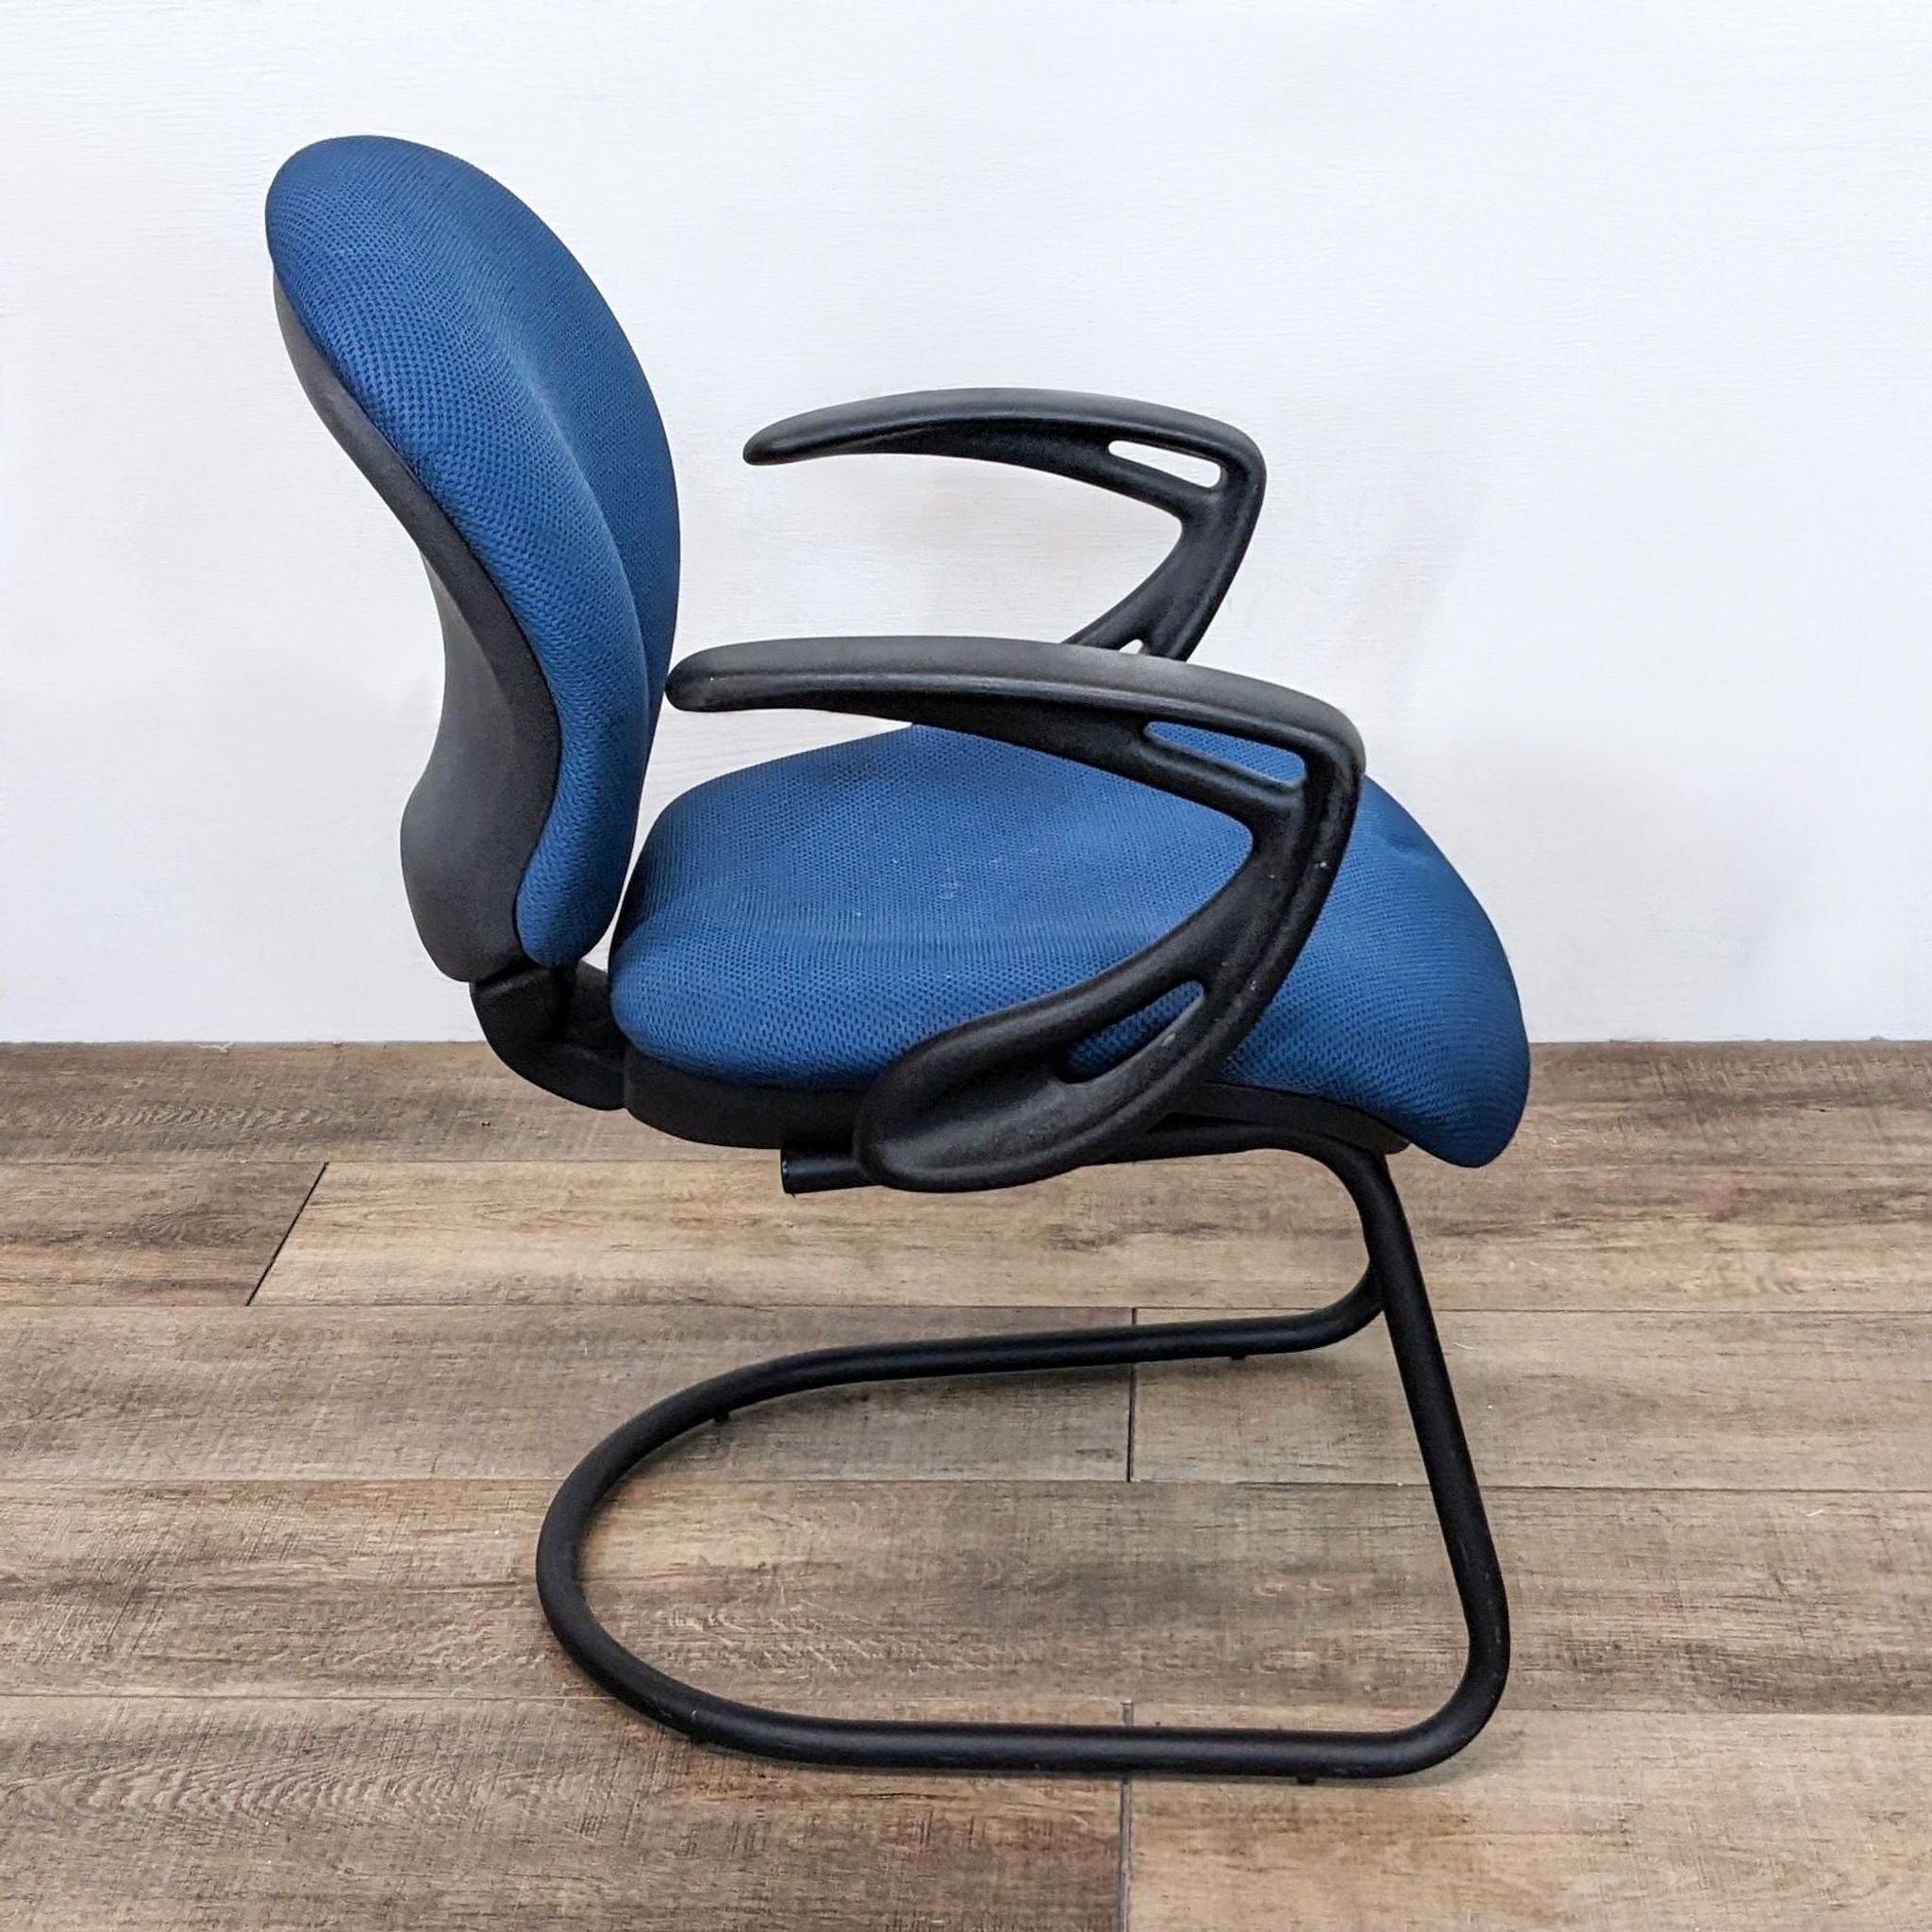 3. "Angle view showcasing the side and curved armrests of a blue Reperch office chair on a wooden floor."